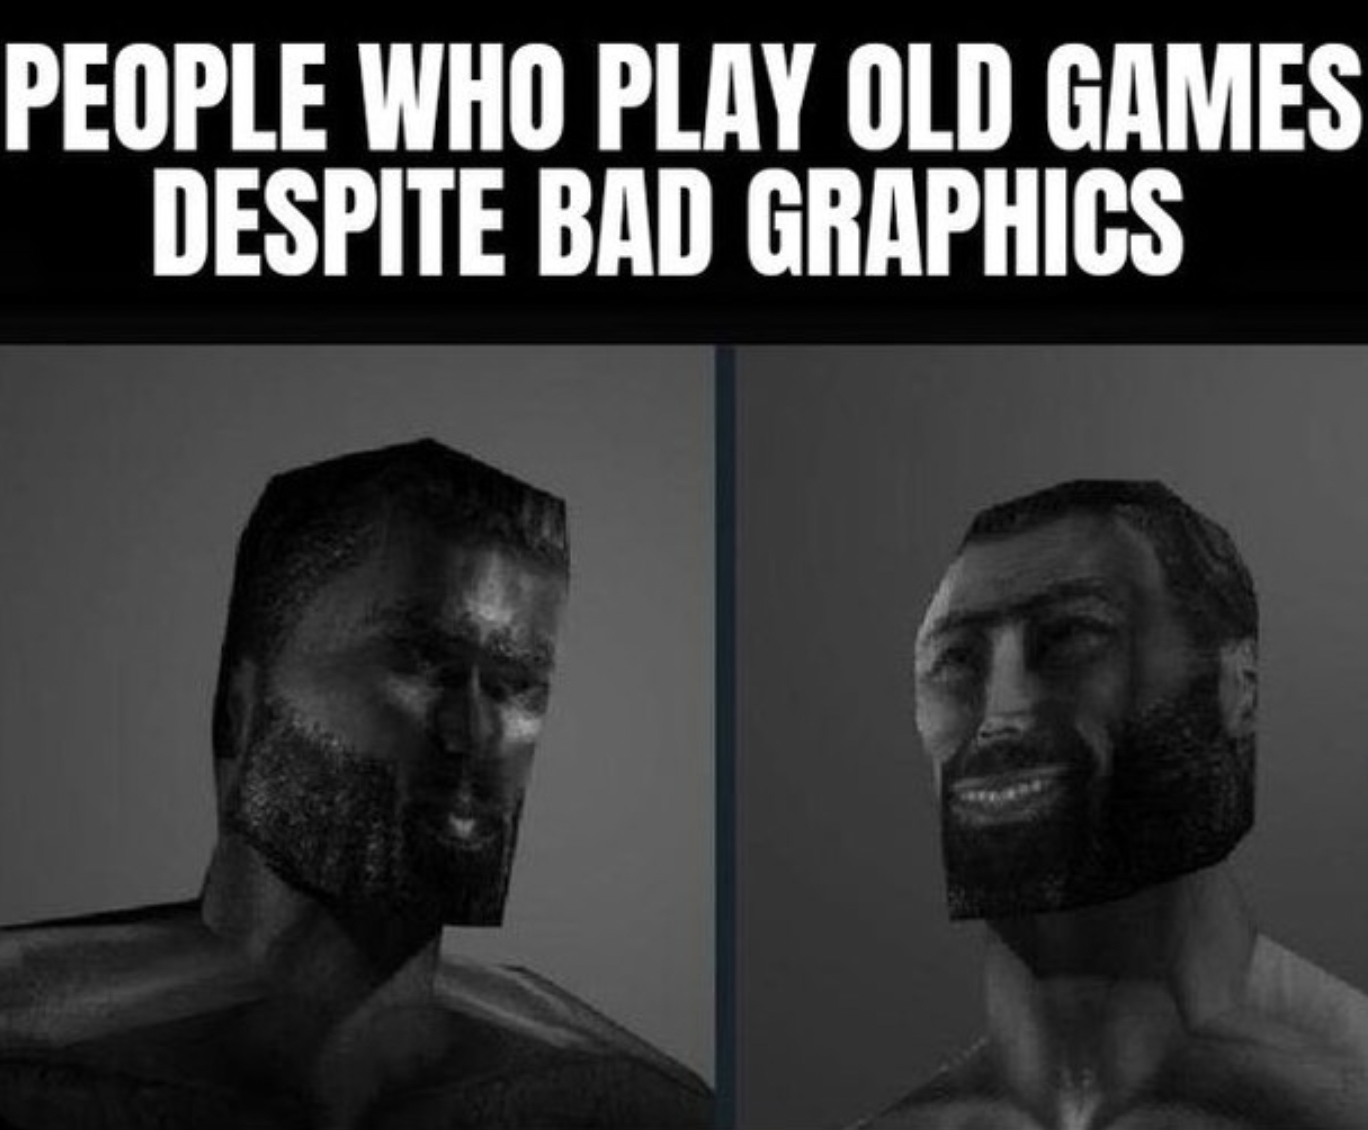 gaming memes - land of the giants - People Who Play Old Games Despite Bad Graphics www